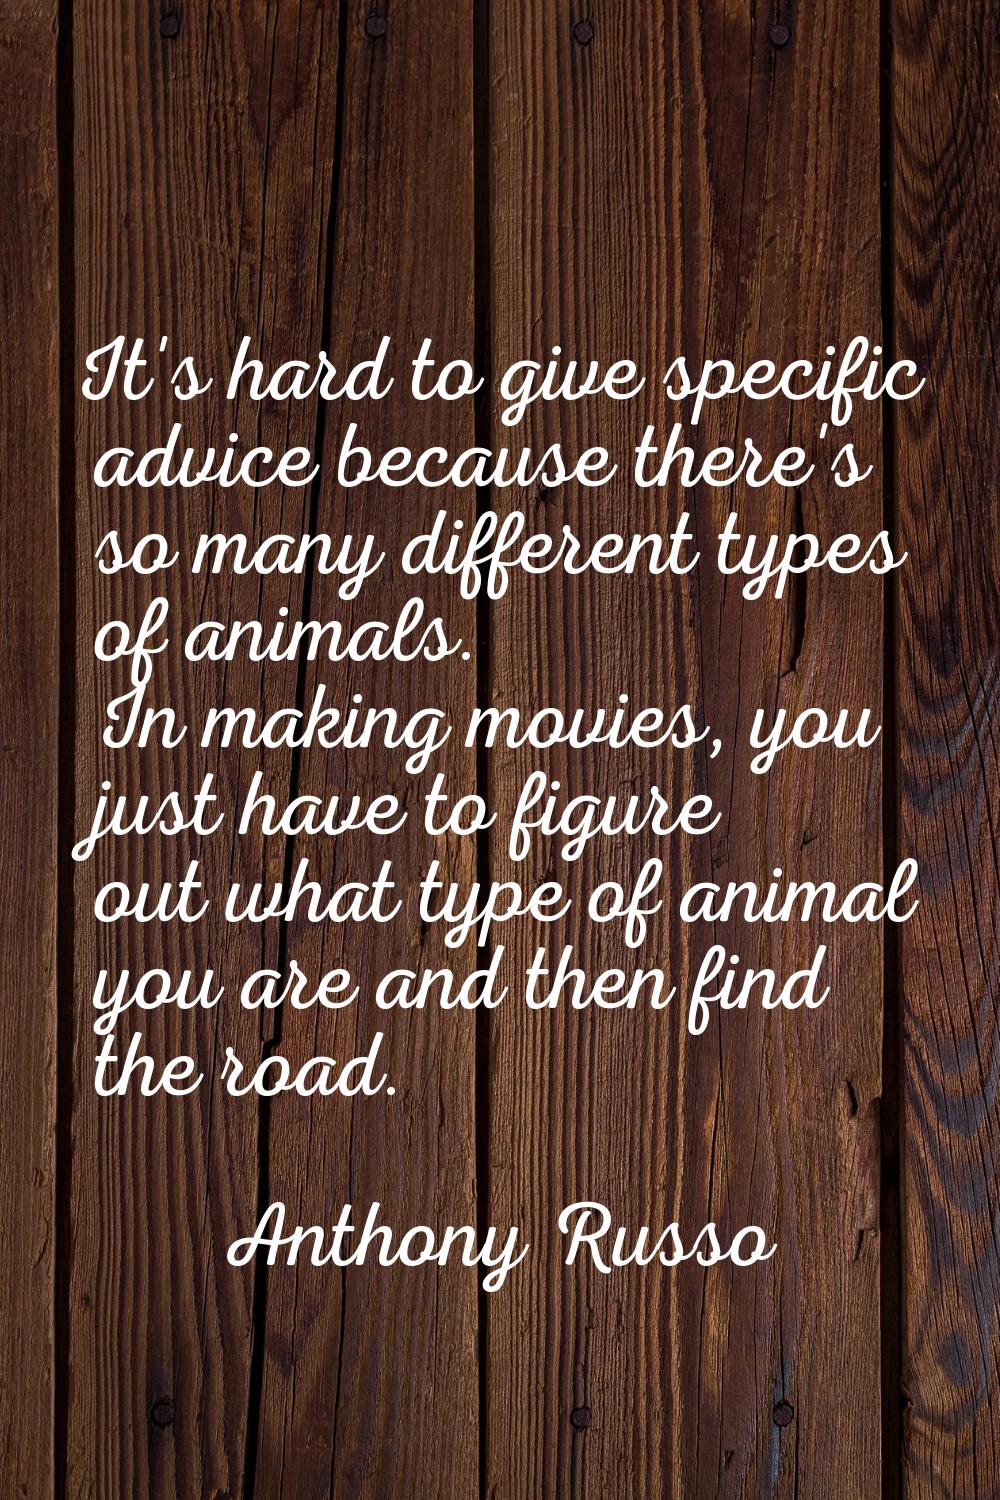 It's hard to give specific advice because there's so many different types of animals. In making mov